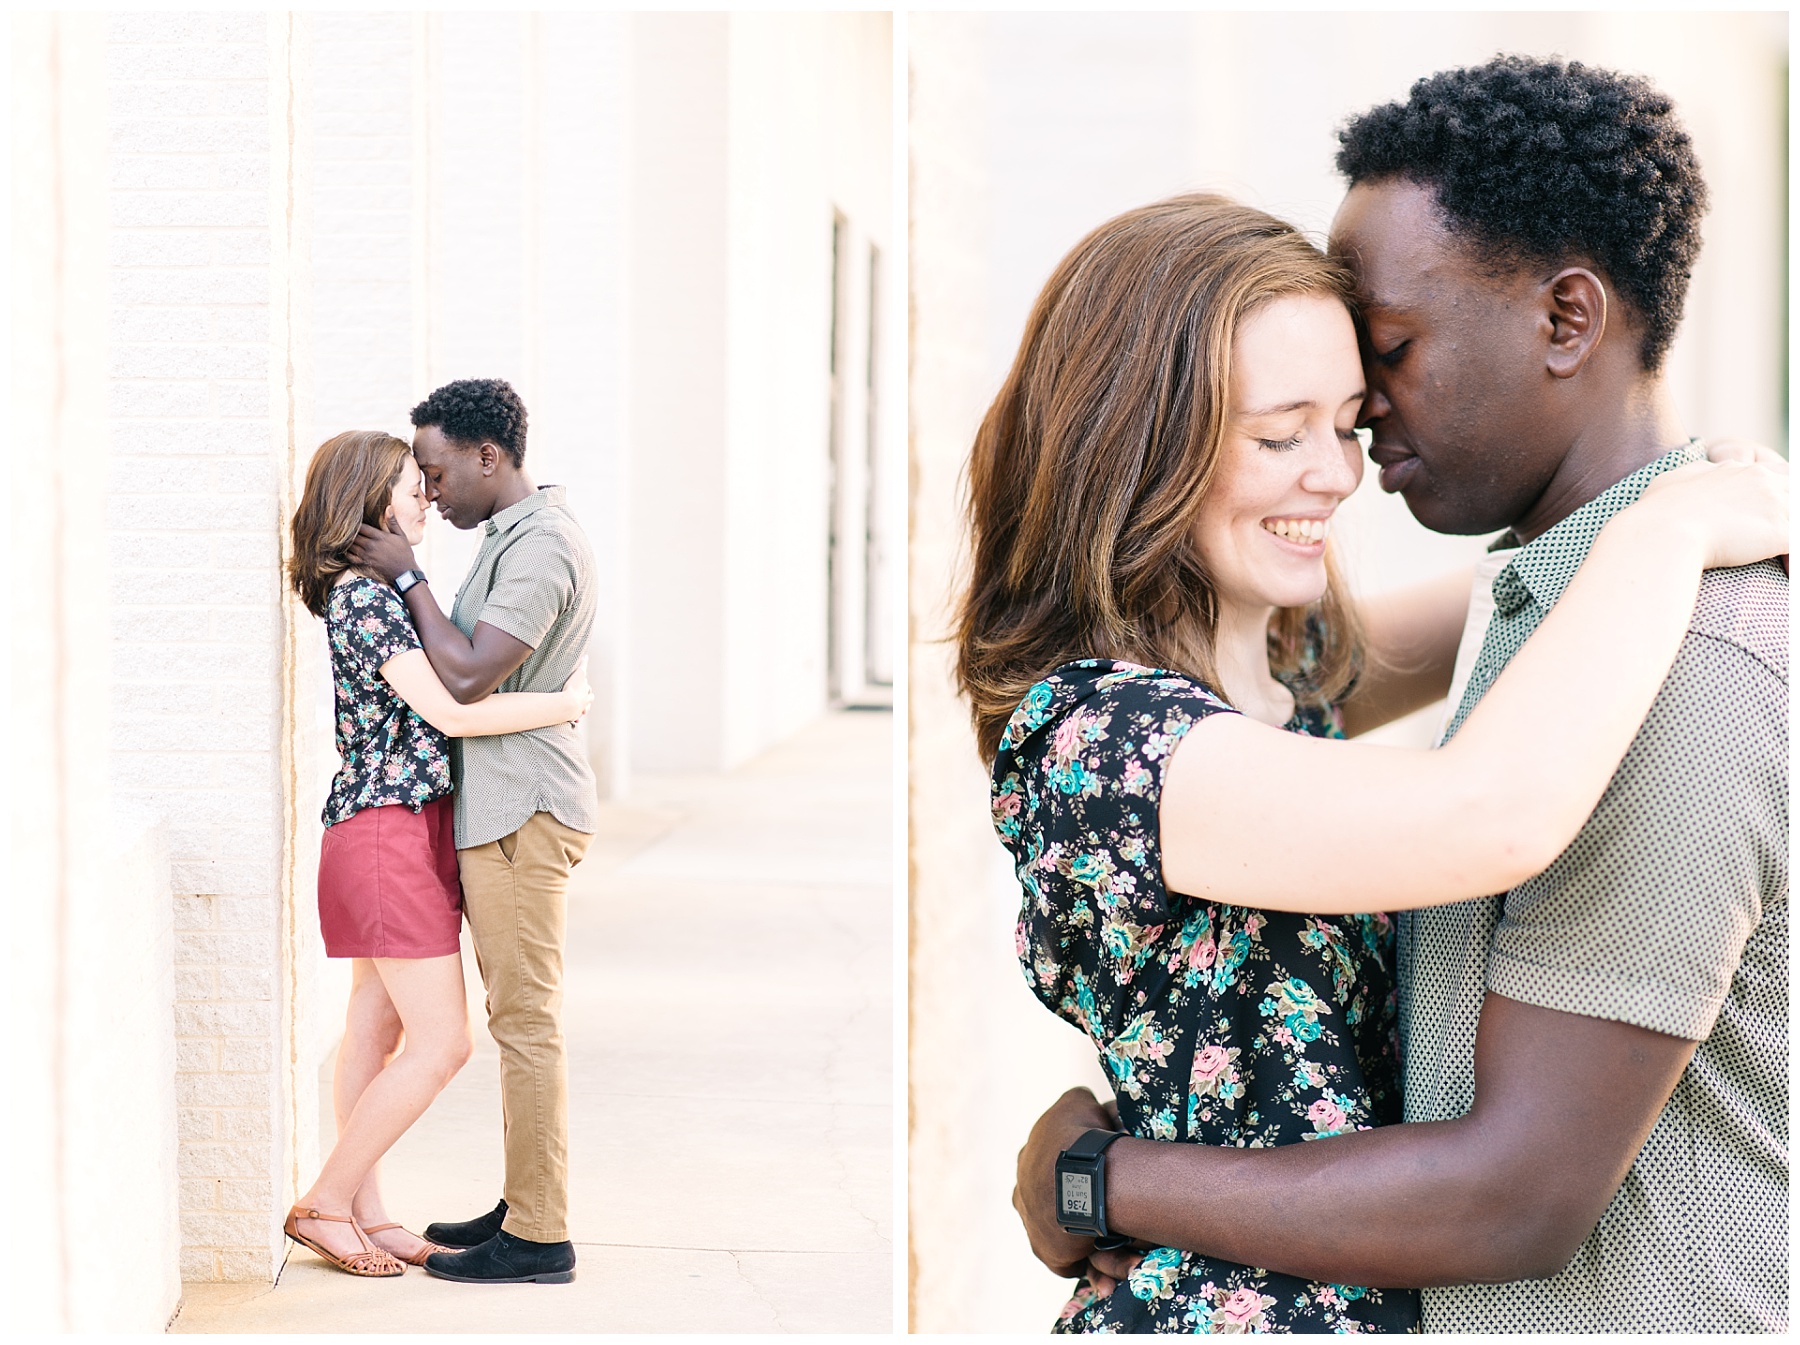 uptown church engagement photos in charlotte nc